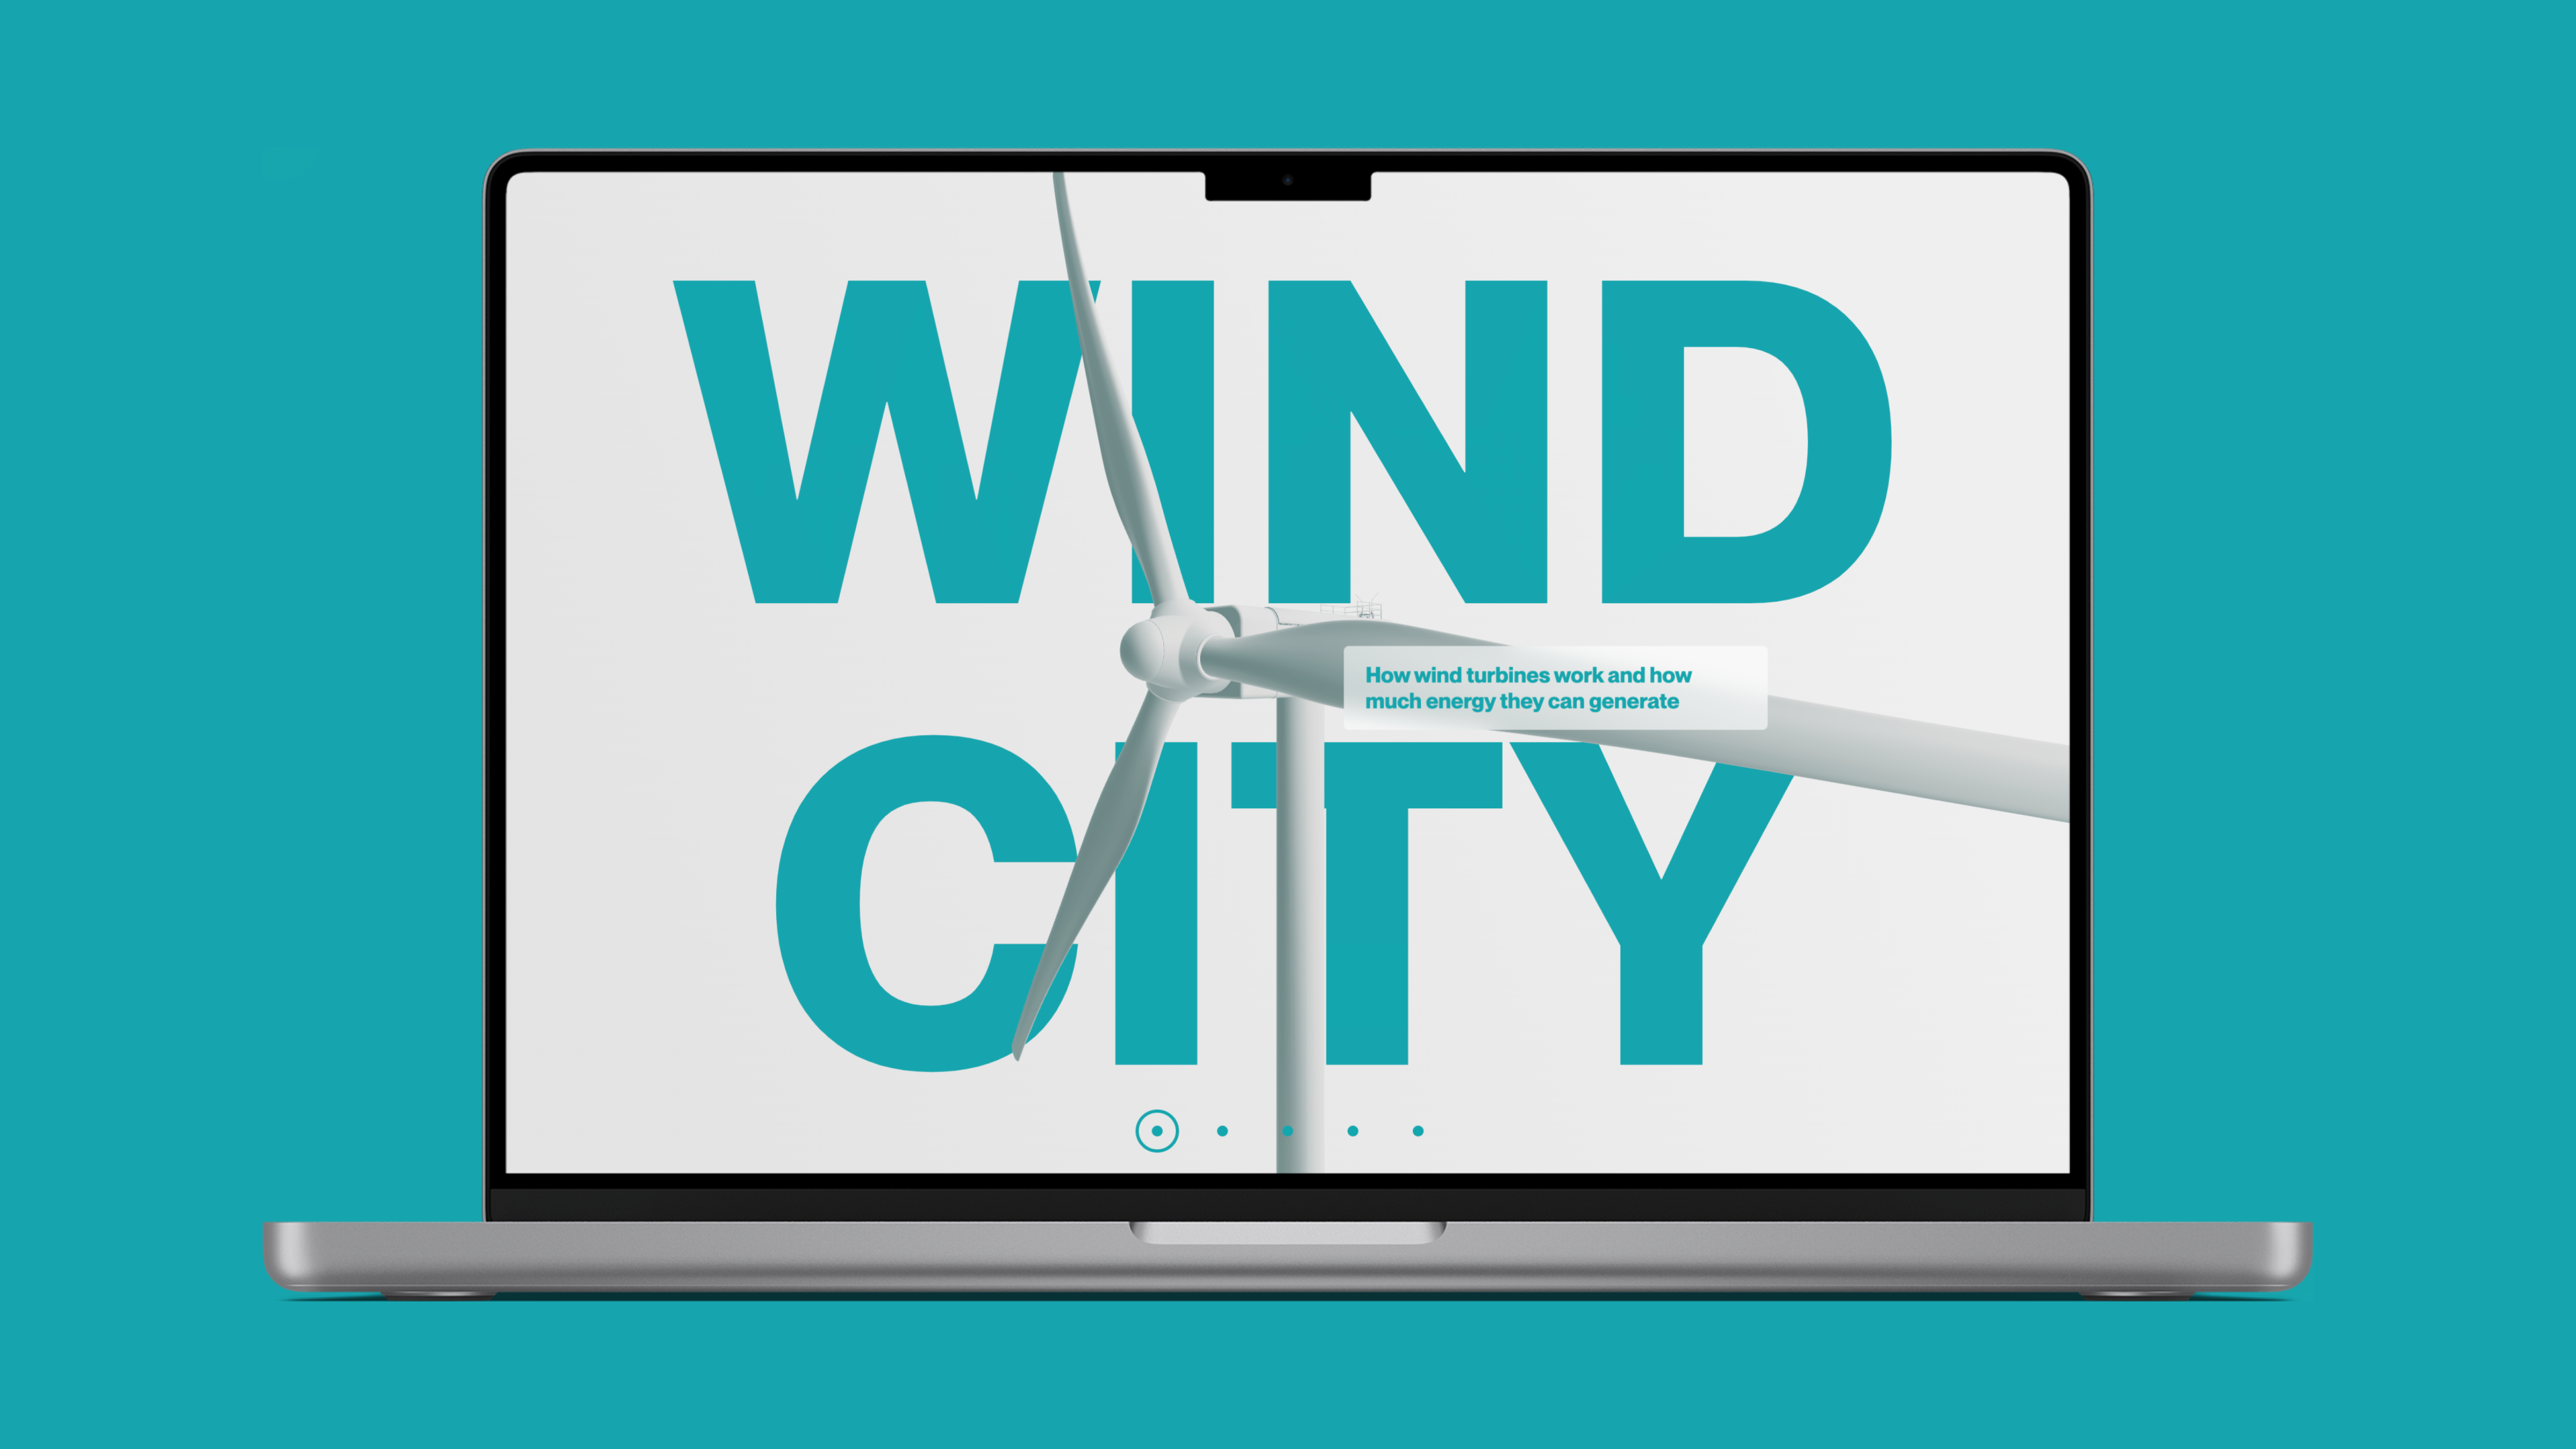 The “WIND CITY” website features an interactive 3D wind turbine model. As users navigate the site, the turbine responds in real-time to cursor movements.